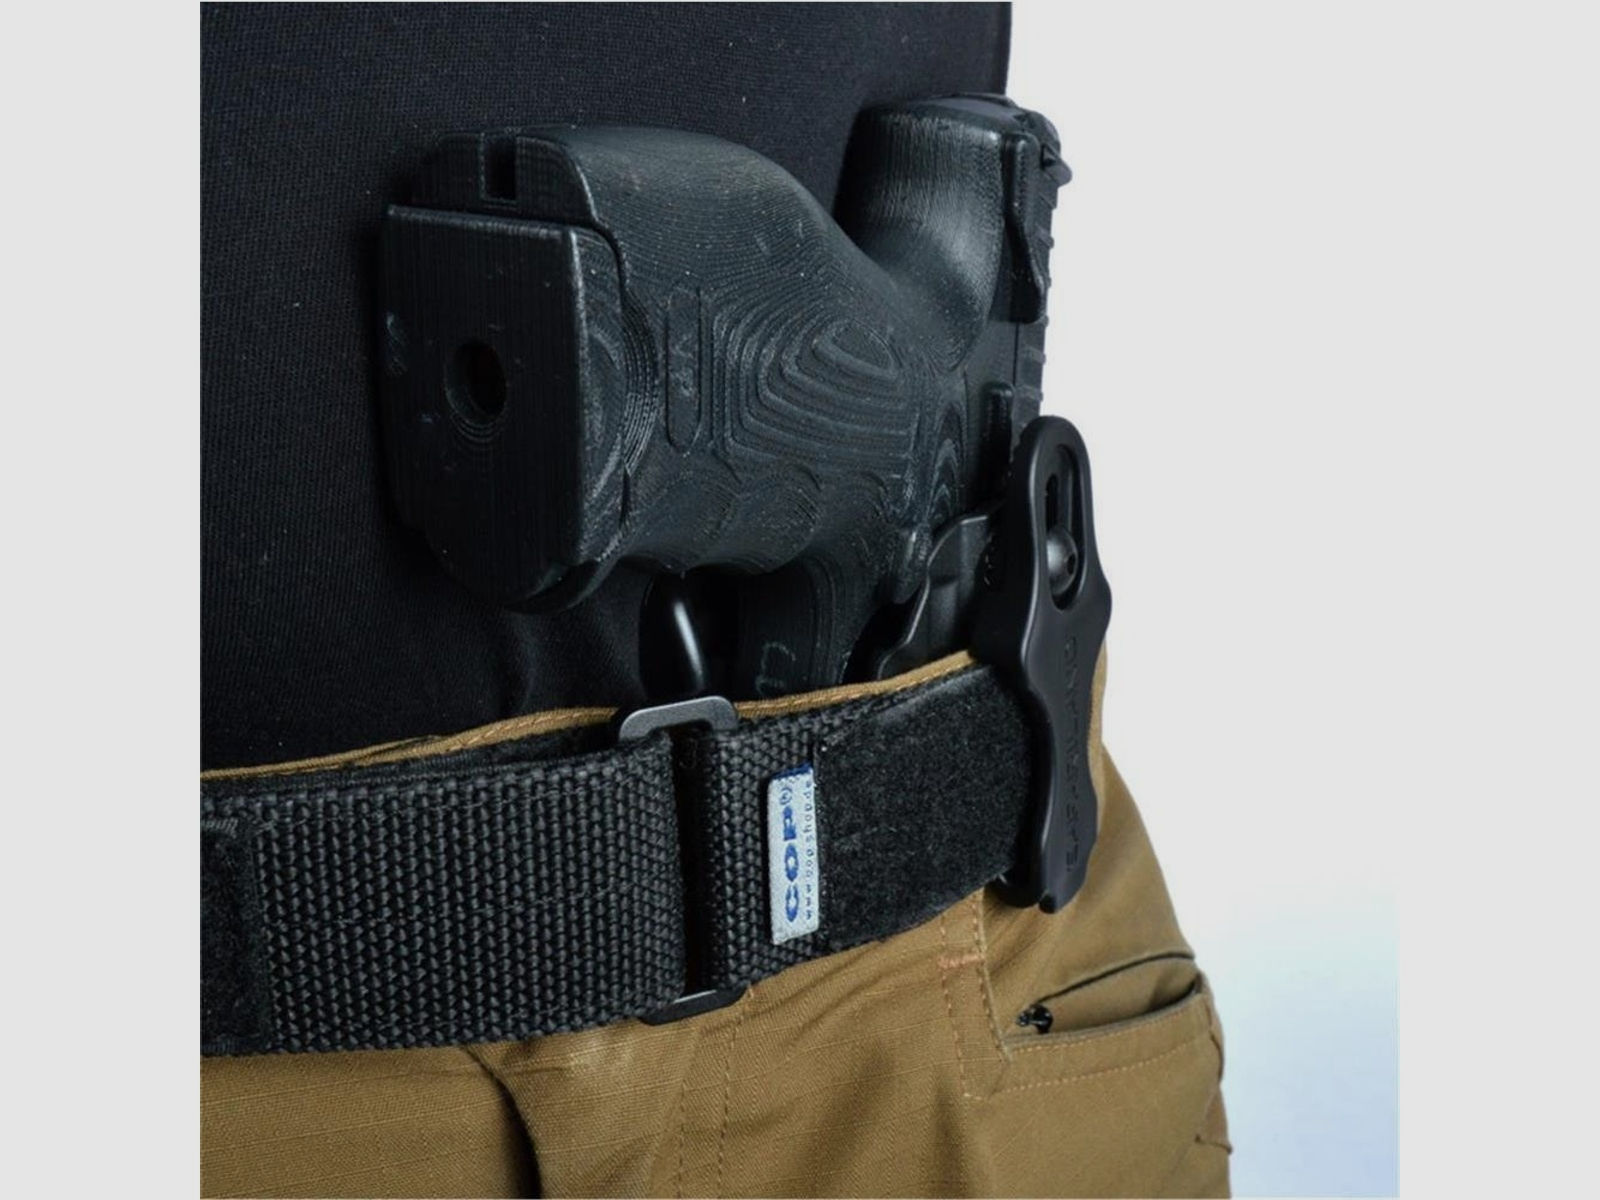 SAFARILAND 575 GLS "PRO-FIT" 7TS Innenholster (IWB) 283* Glock 19/23/29/32/38/45,H&K 45C/P2000/P30/USP Comp./VP9/VP40,S&amp;W M&amp;P.45 4"/Compact/496/SD9VE,Walther P99/PPQ/M2 4" 9mm,.40-Links